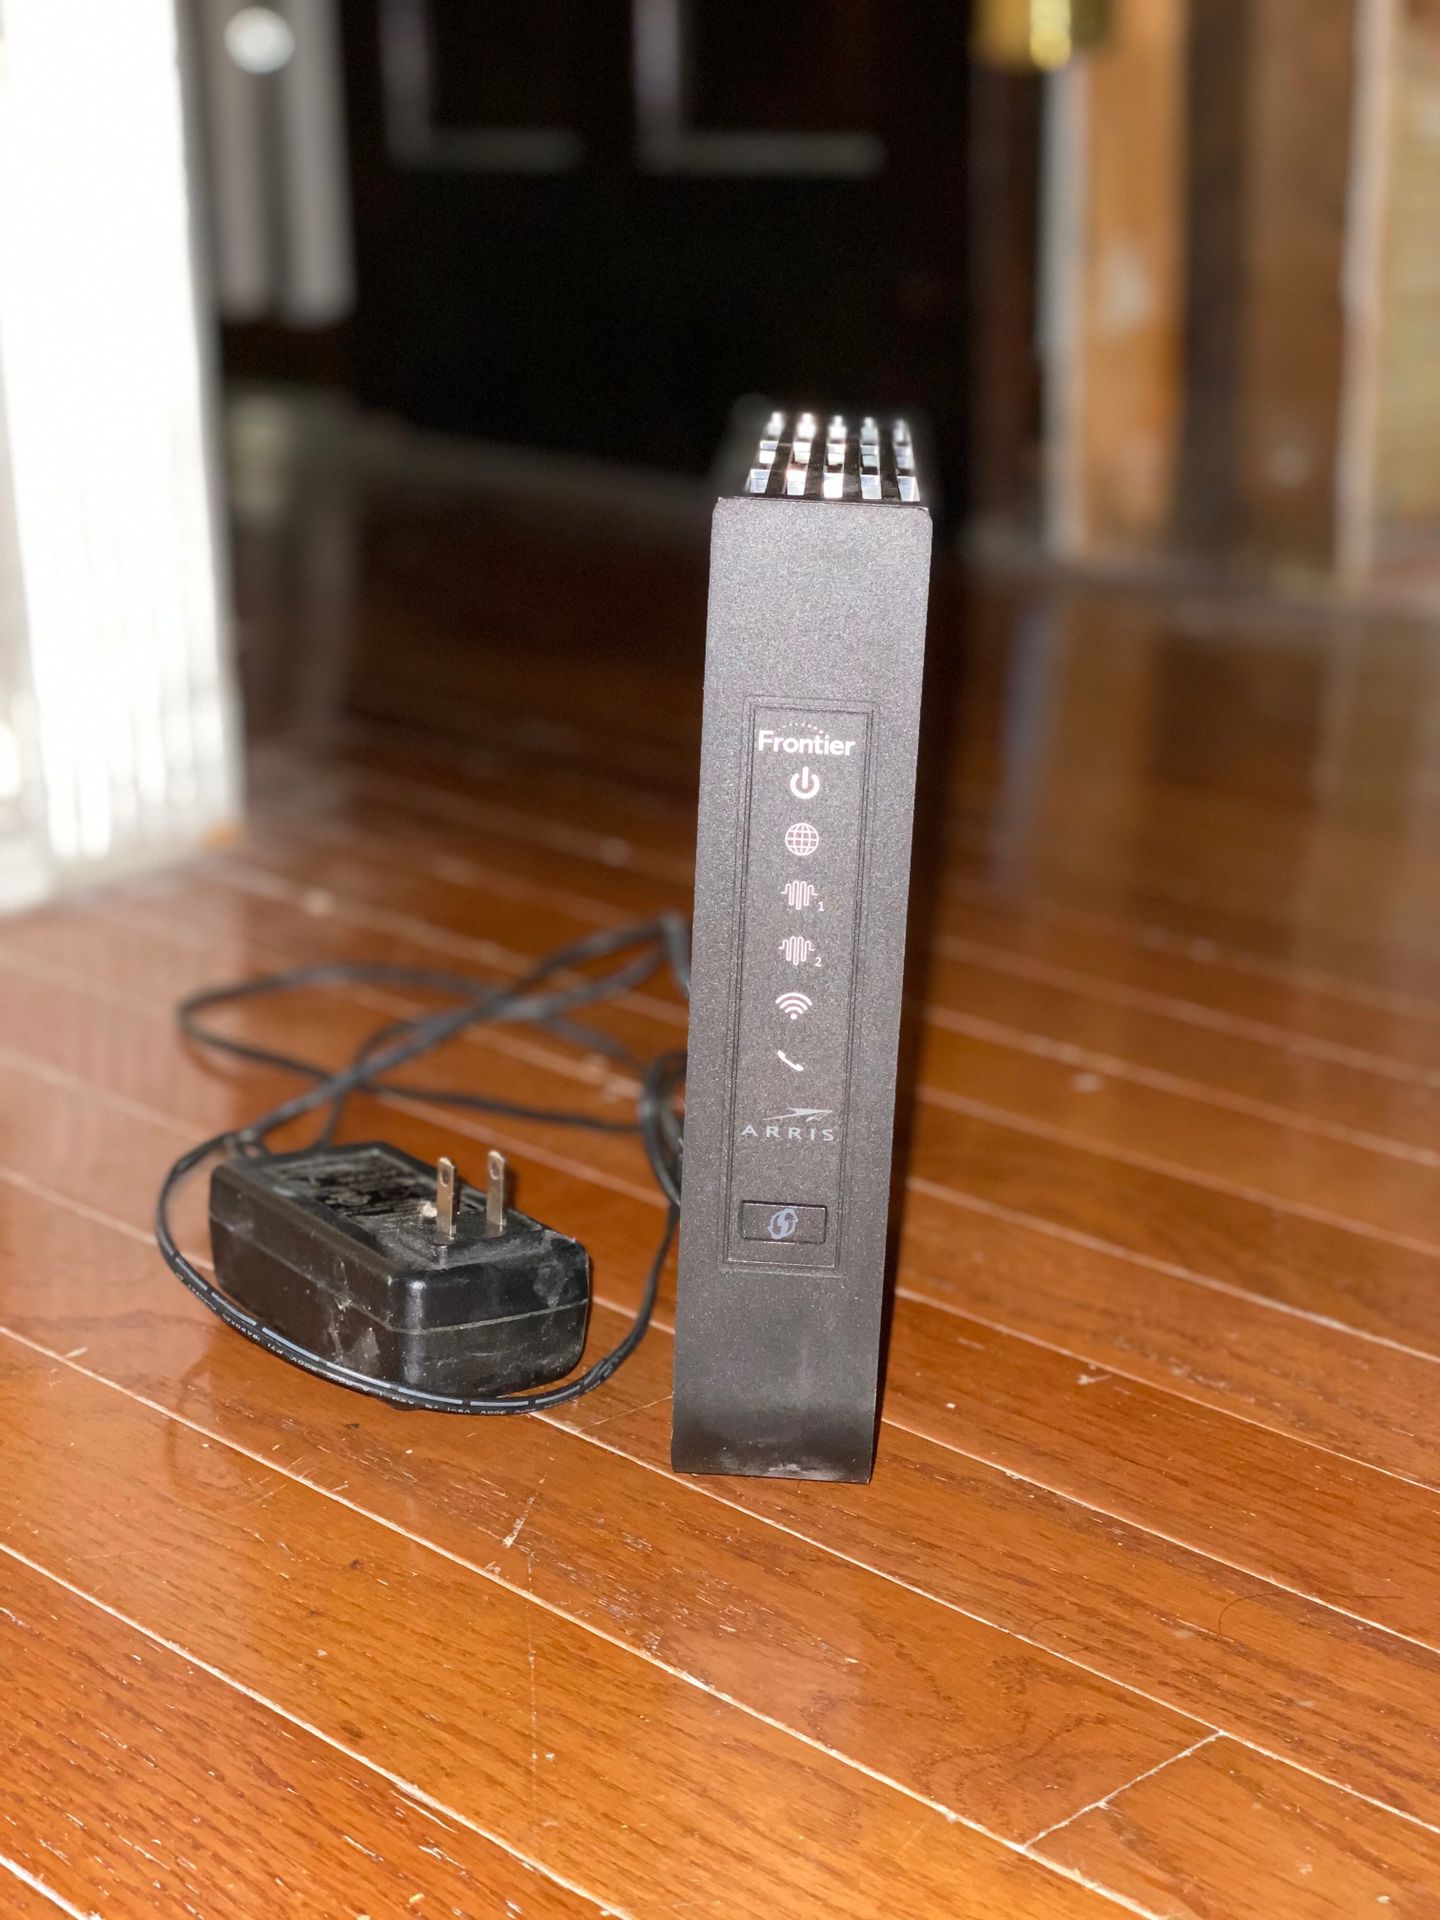 Arris wifi modem and router